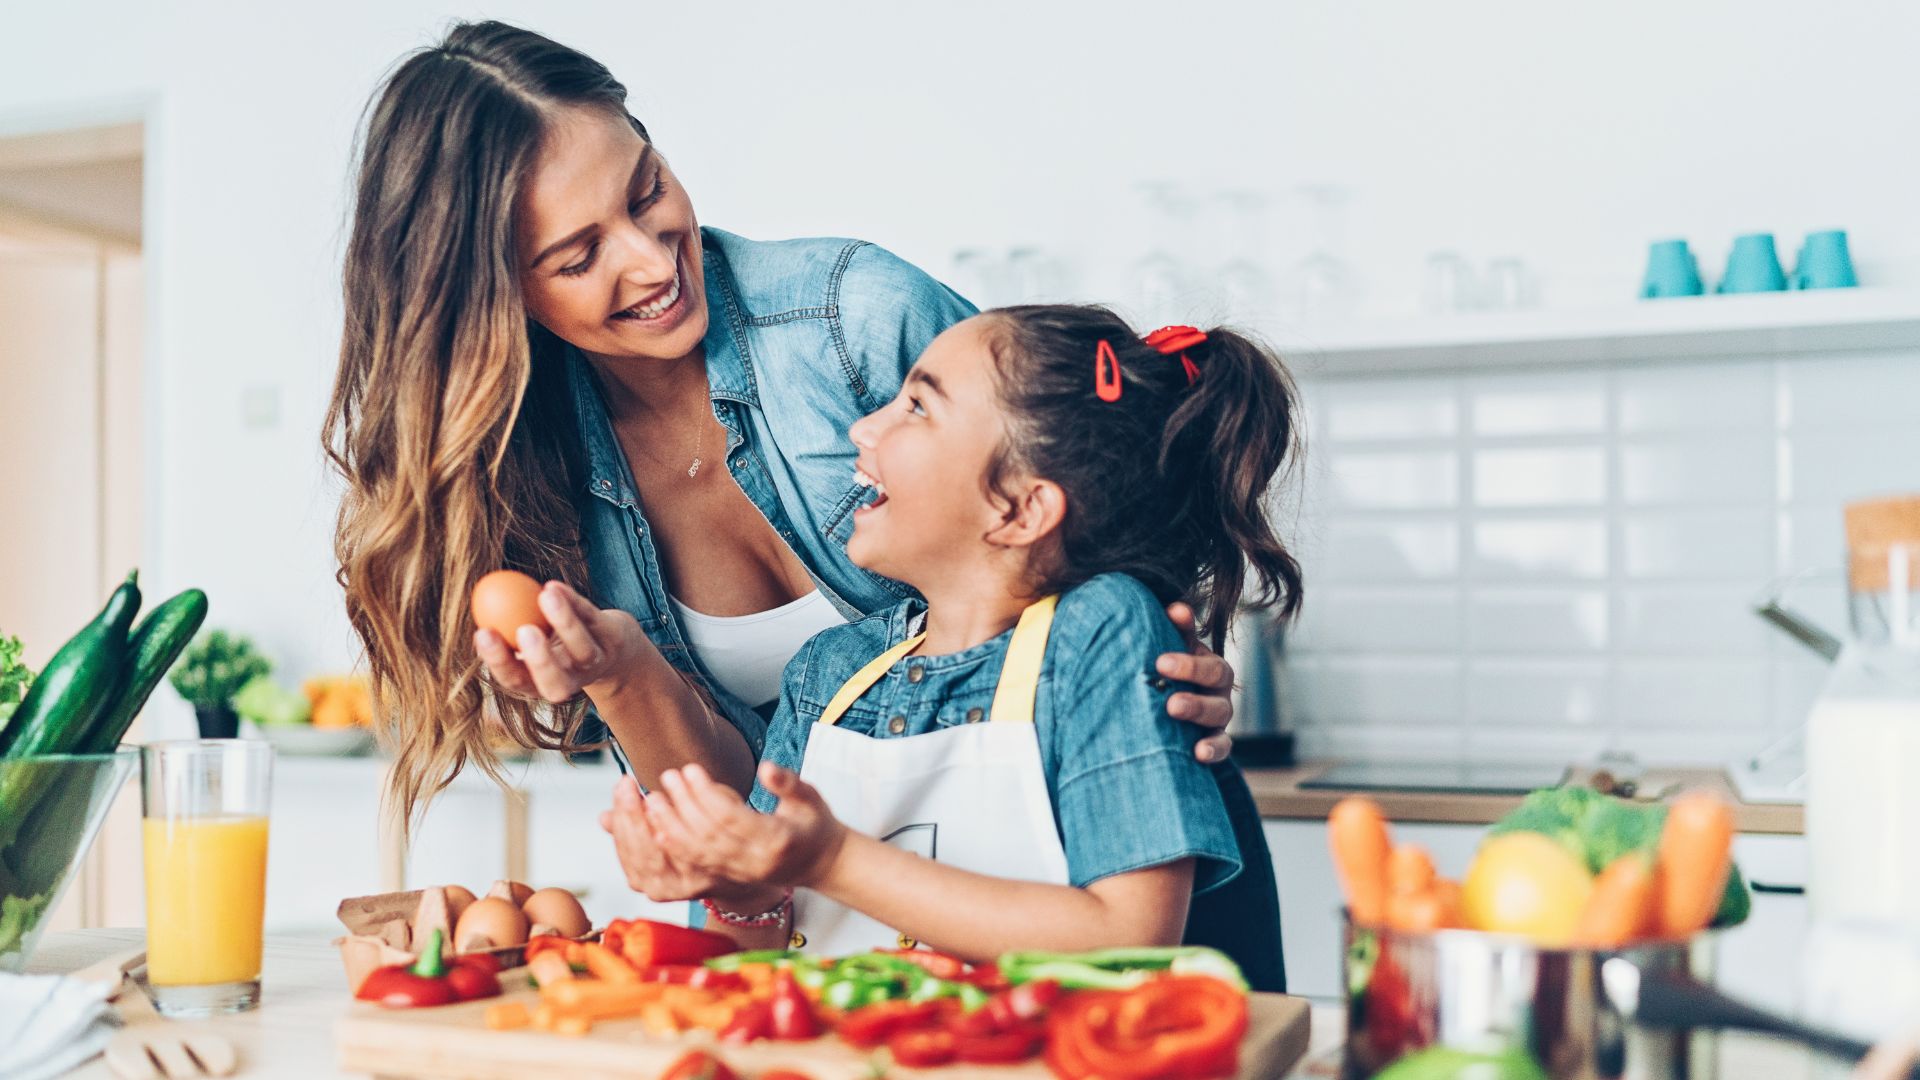 A young girl and her mom are preparing a healthy meal together. Concept to demonstrate ways of staying healthy.